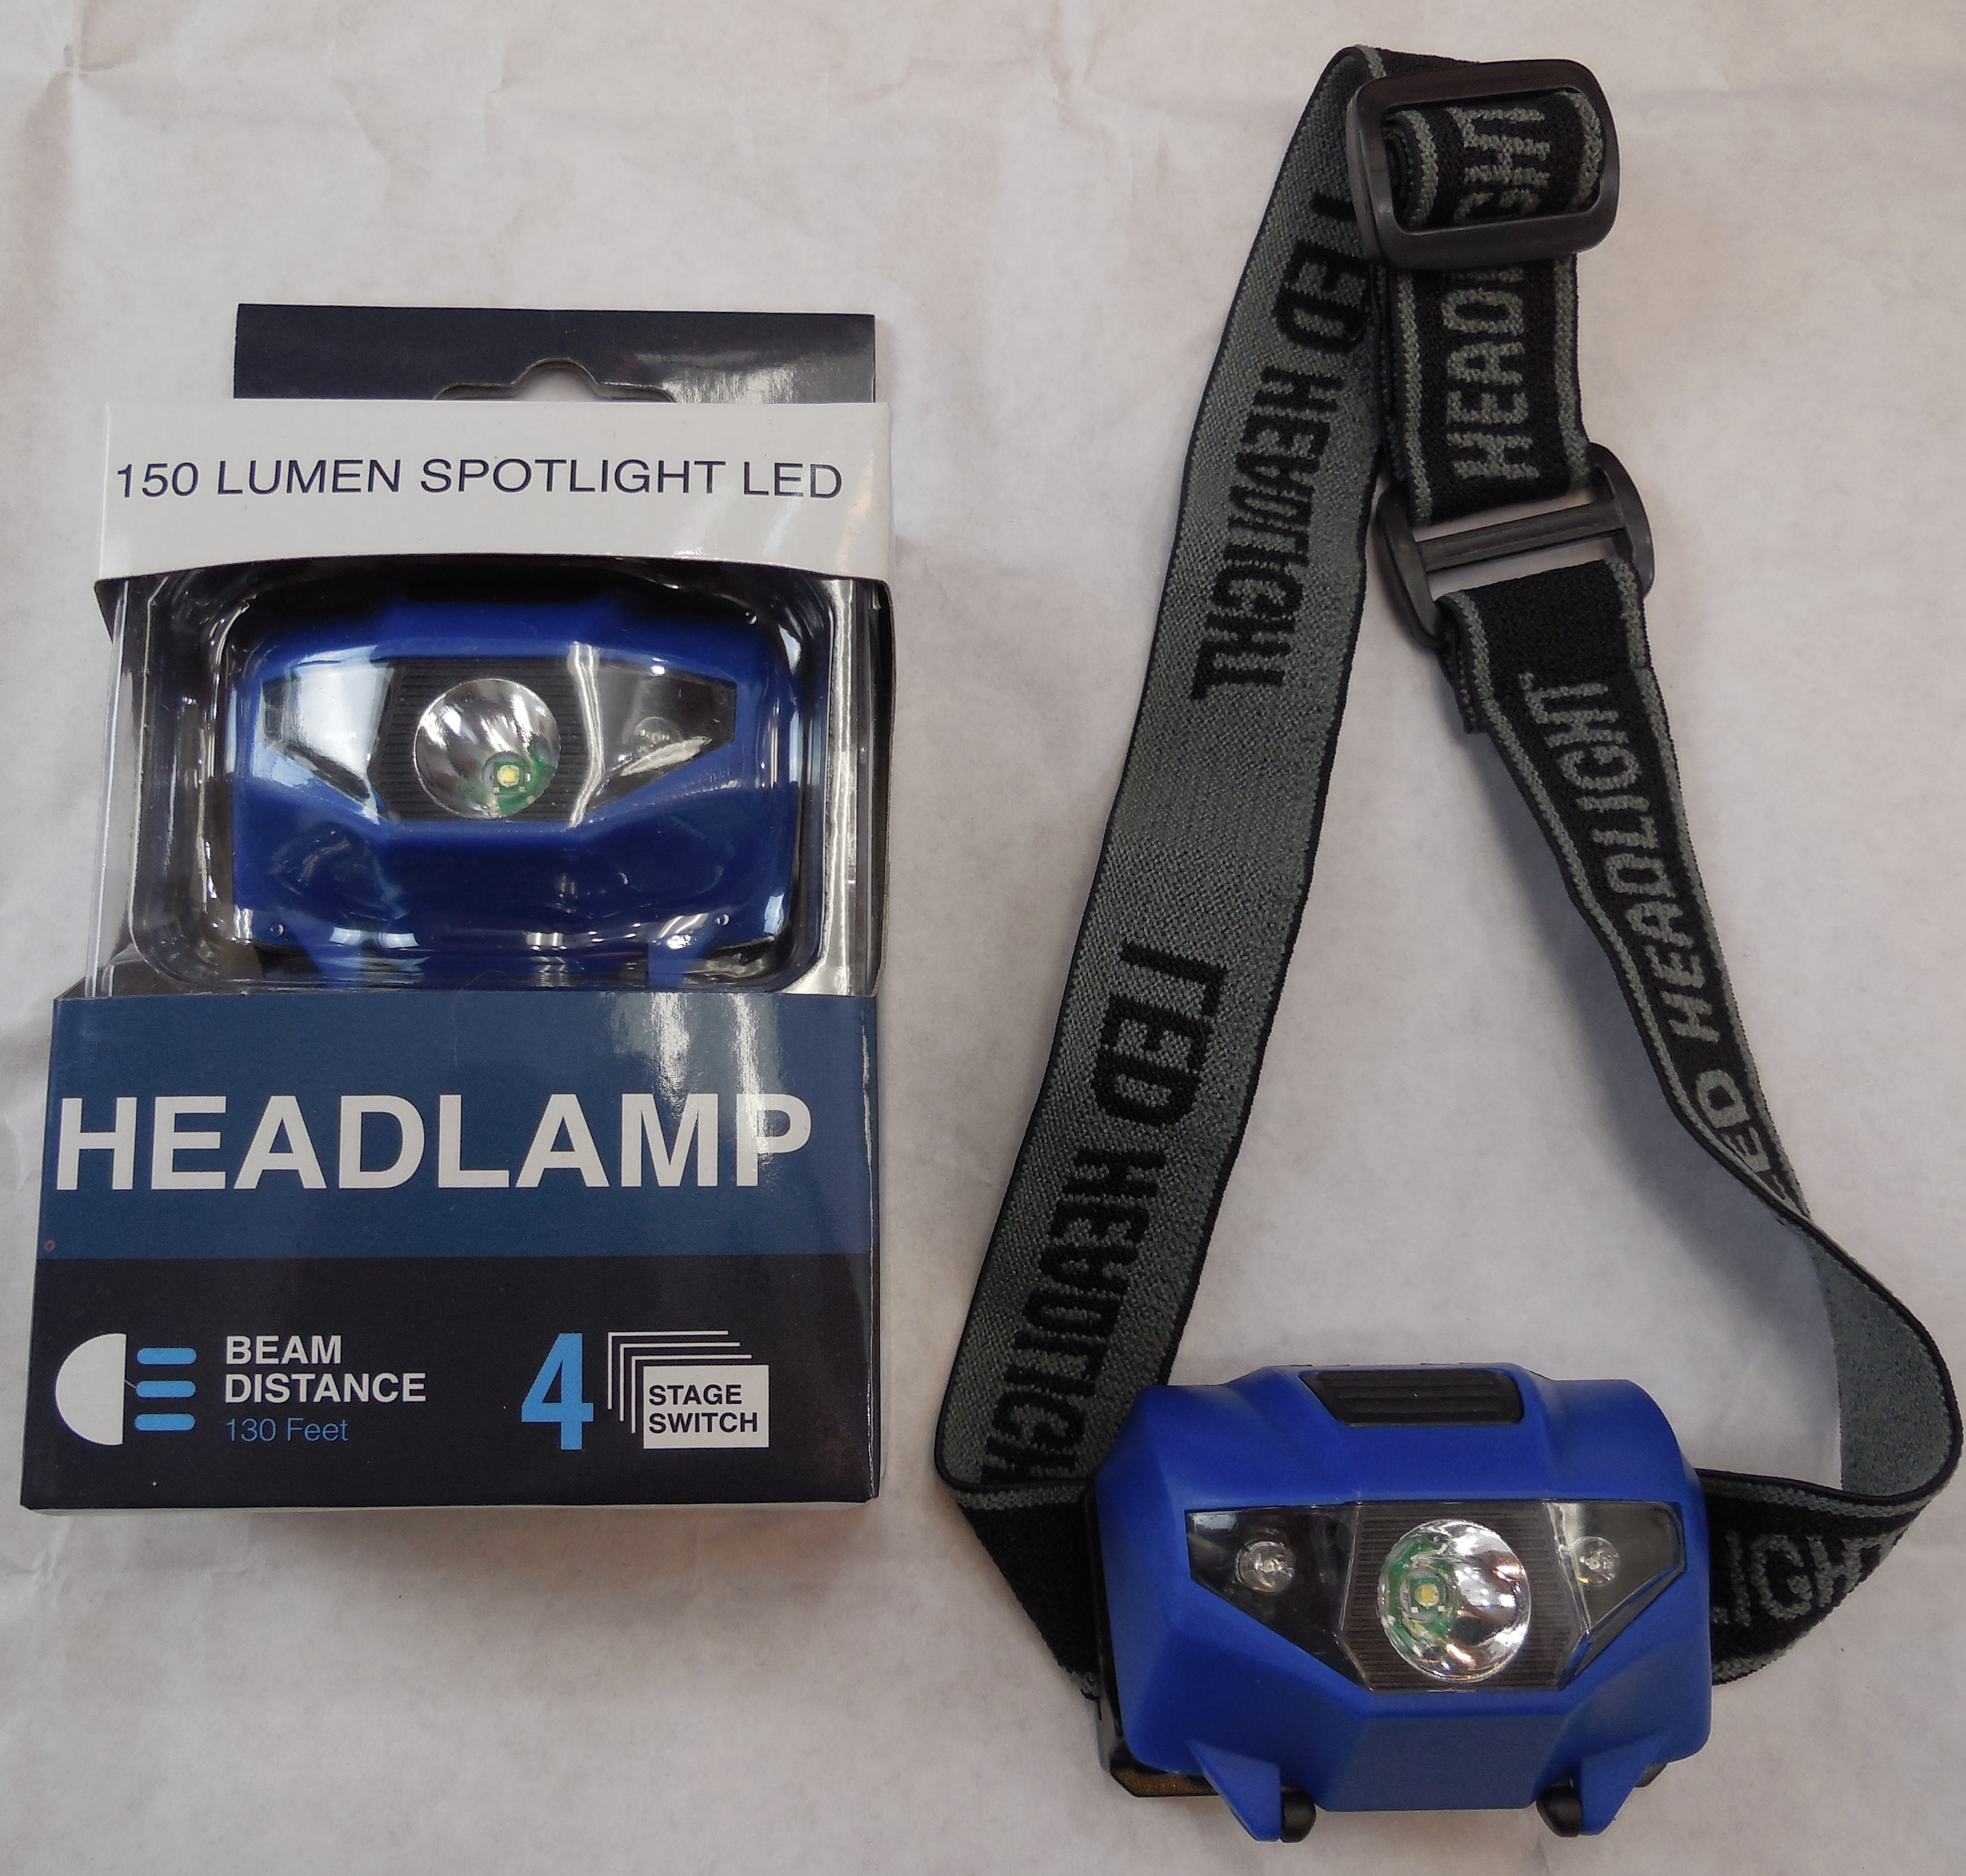 A LED head lamp with a blue strap.